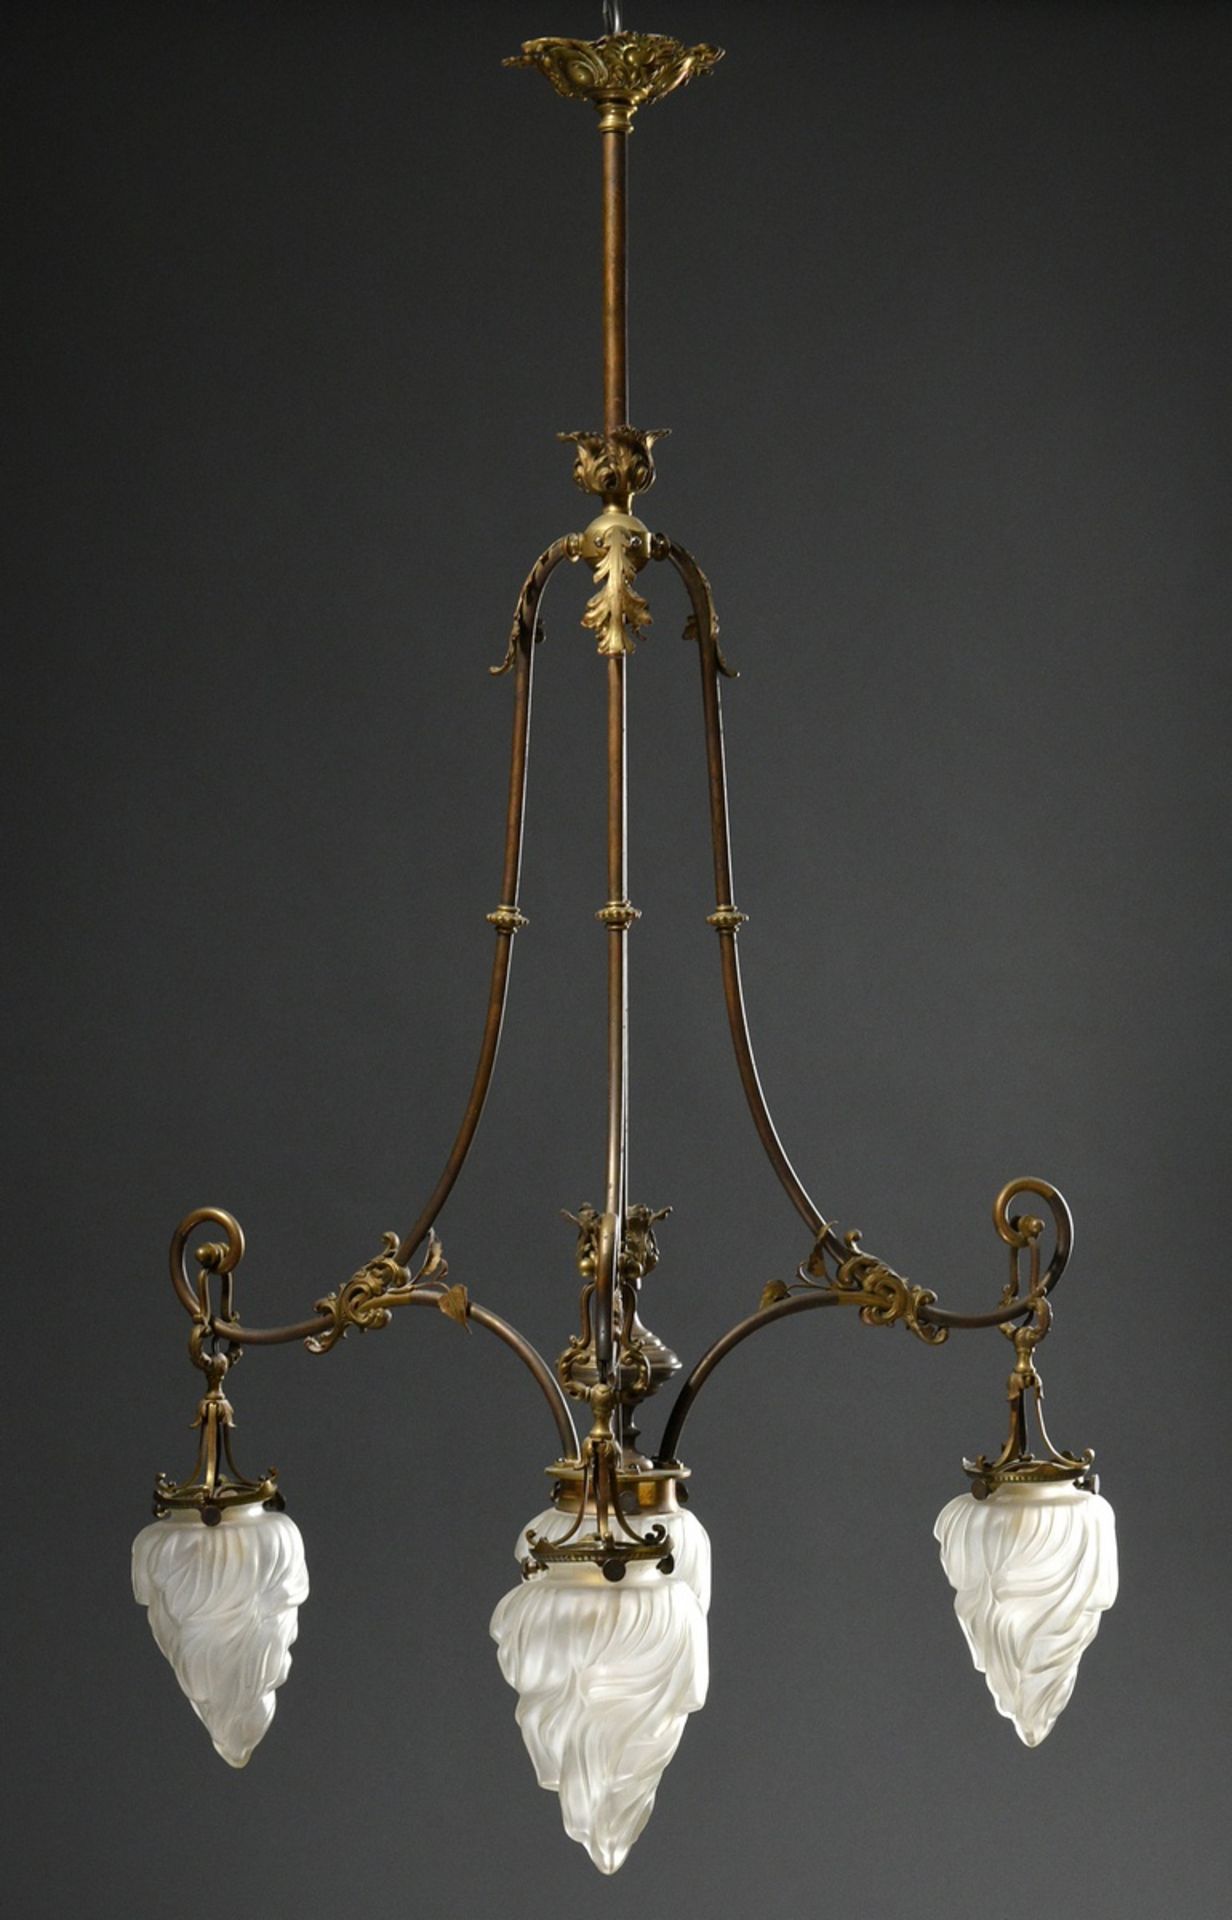 Wilhelminian period ceiling lamp with 4 frosted "flames" glass domes on brass frame with floral dec - Image 3 of 12